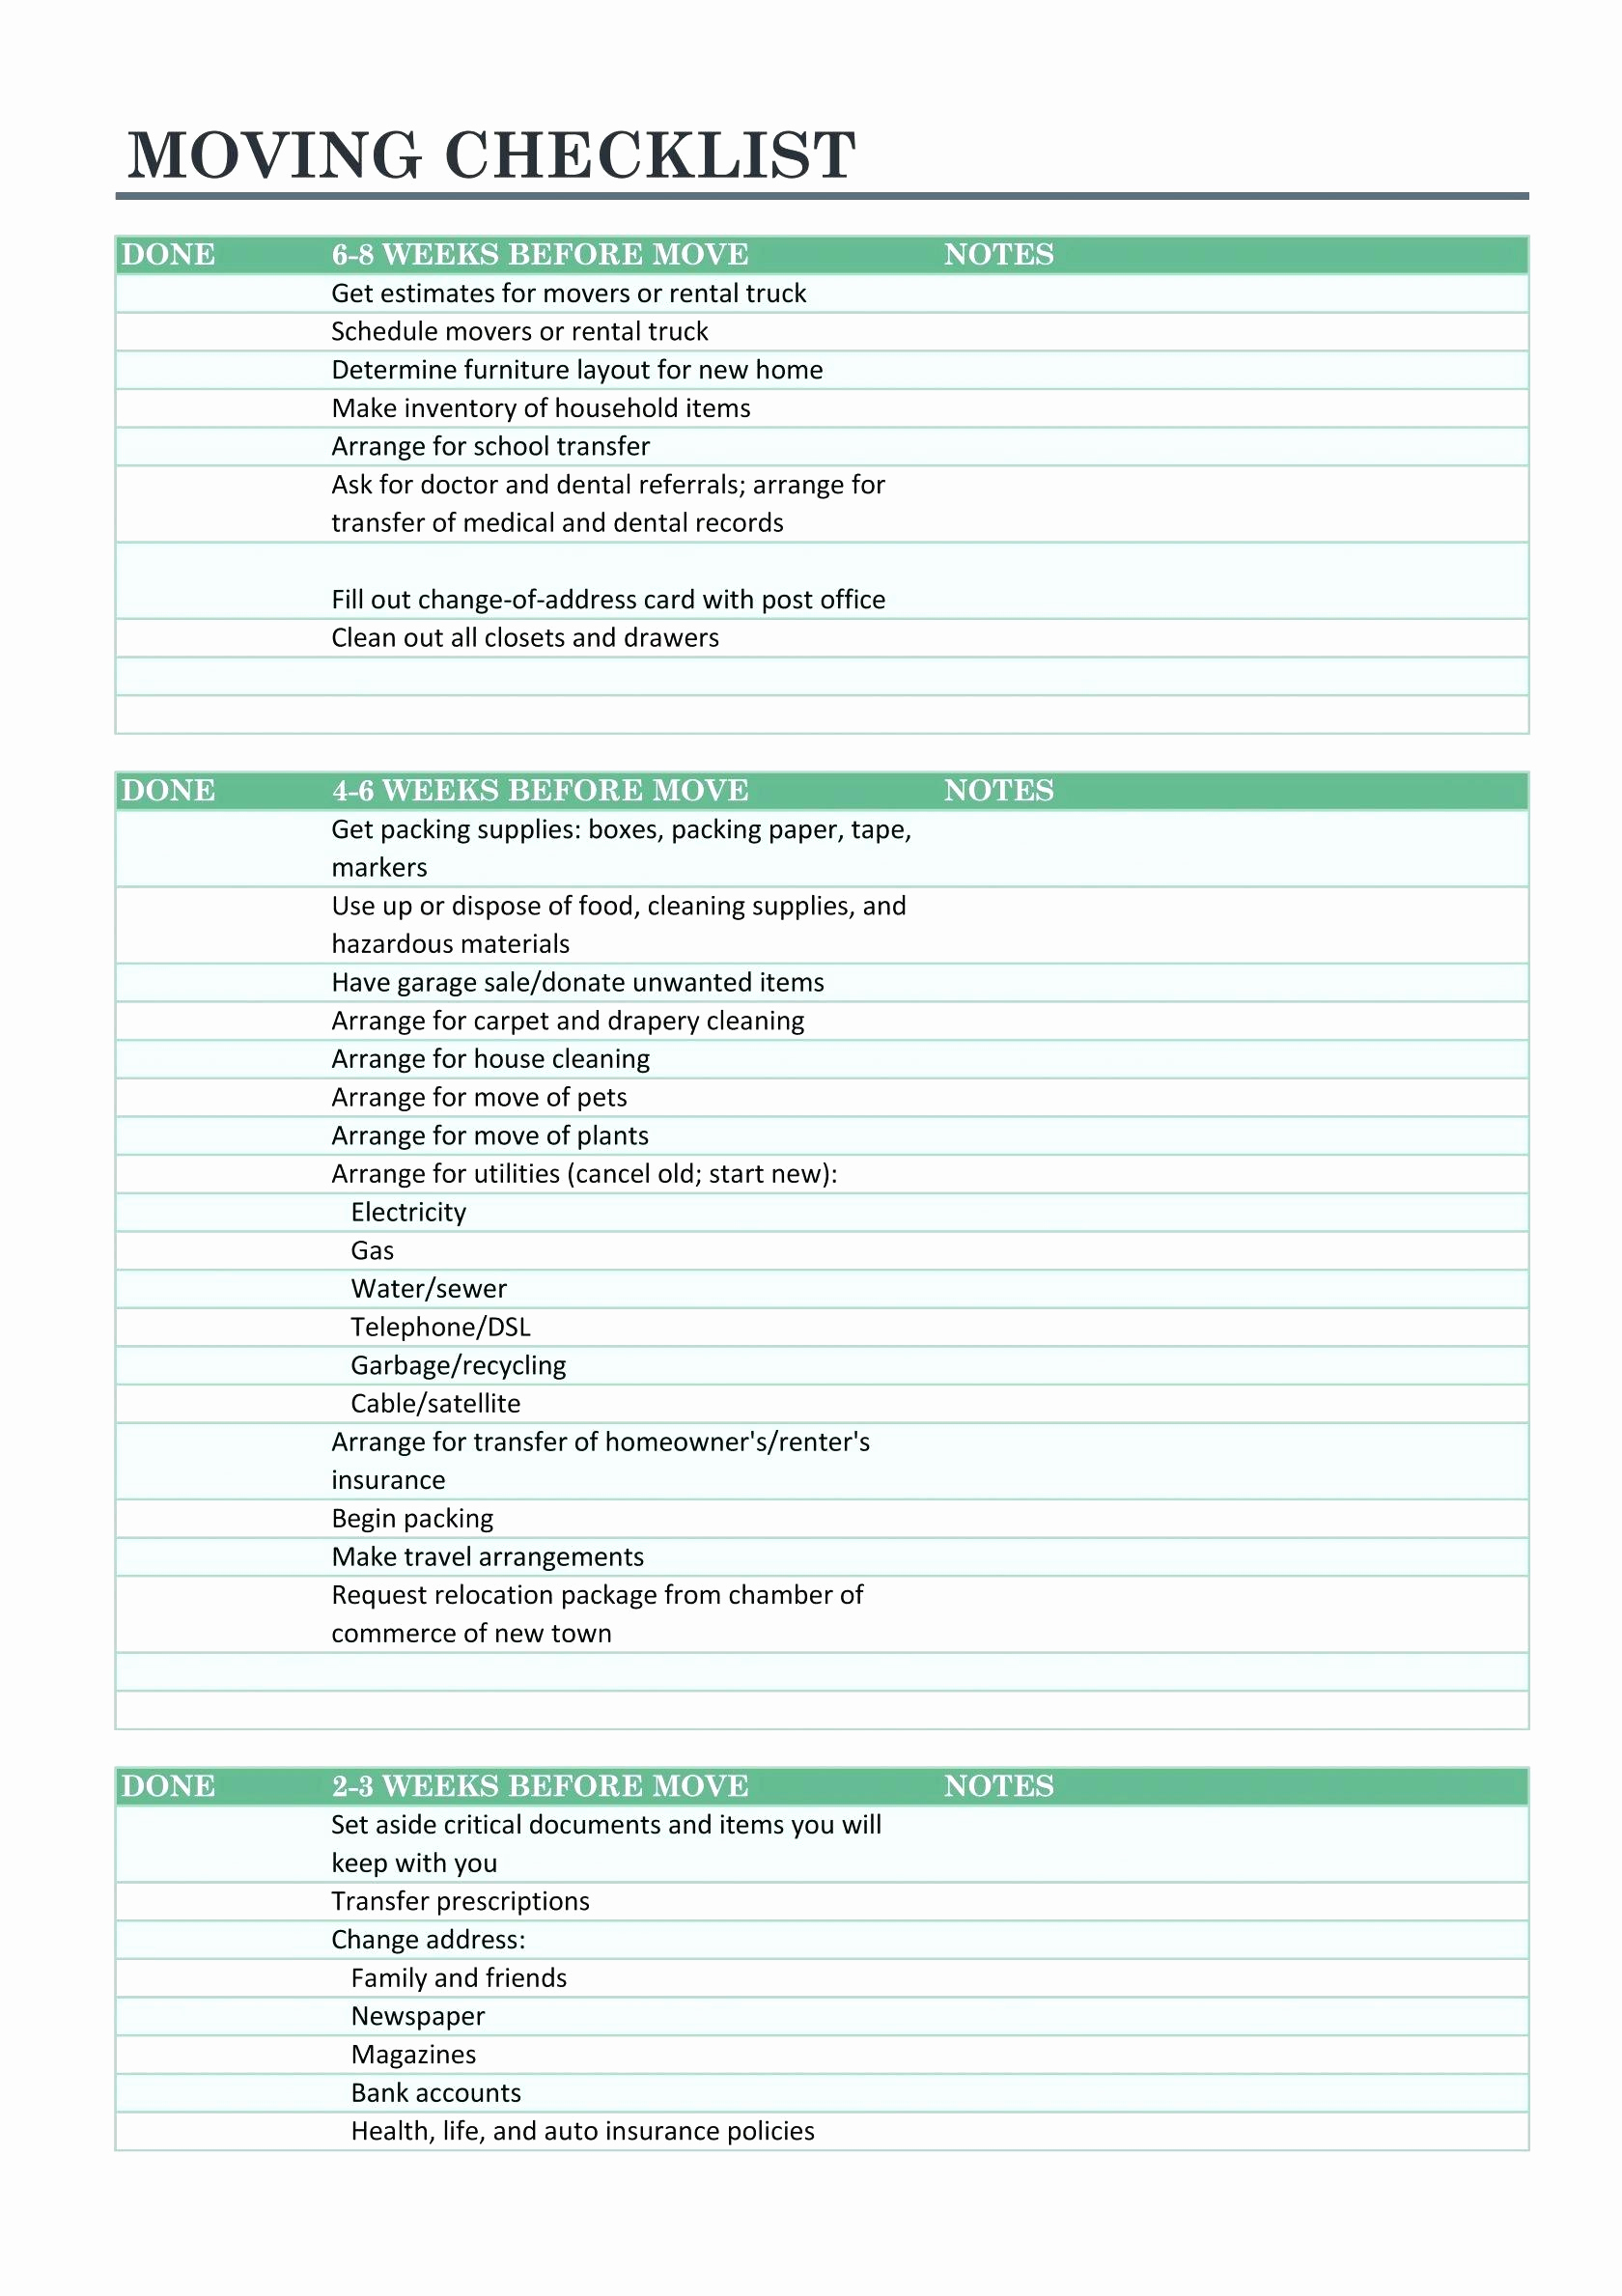 50 Luxury Office Supplies Inventory Template - Documents Ideas in